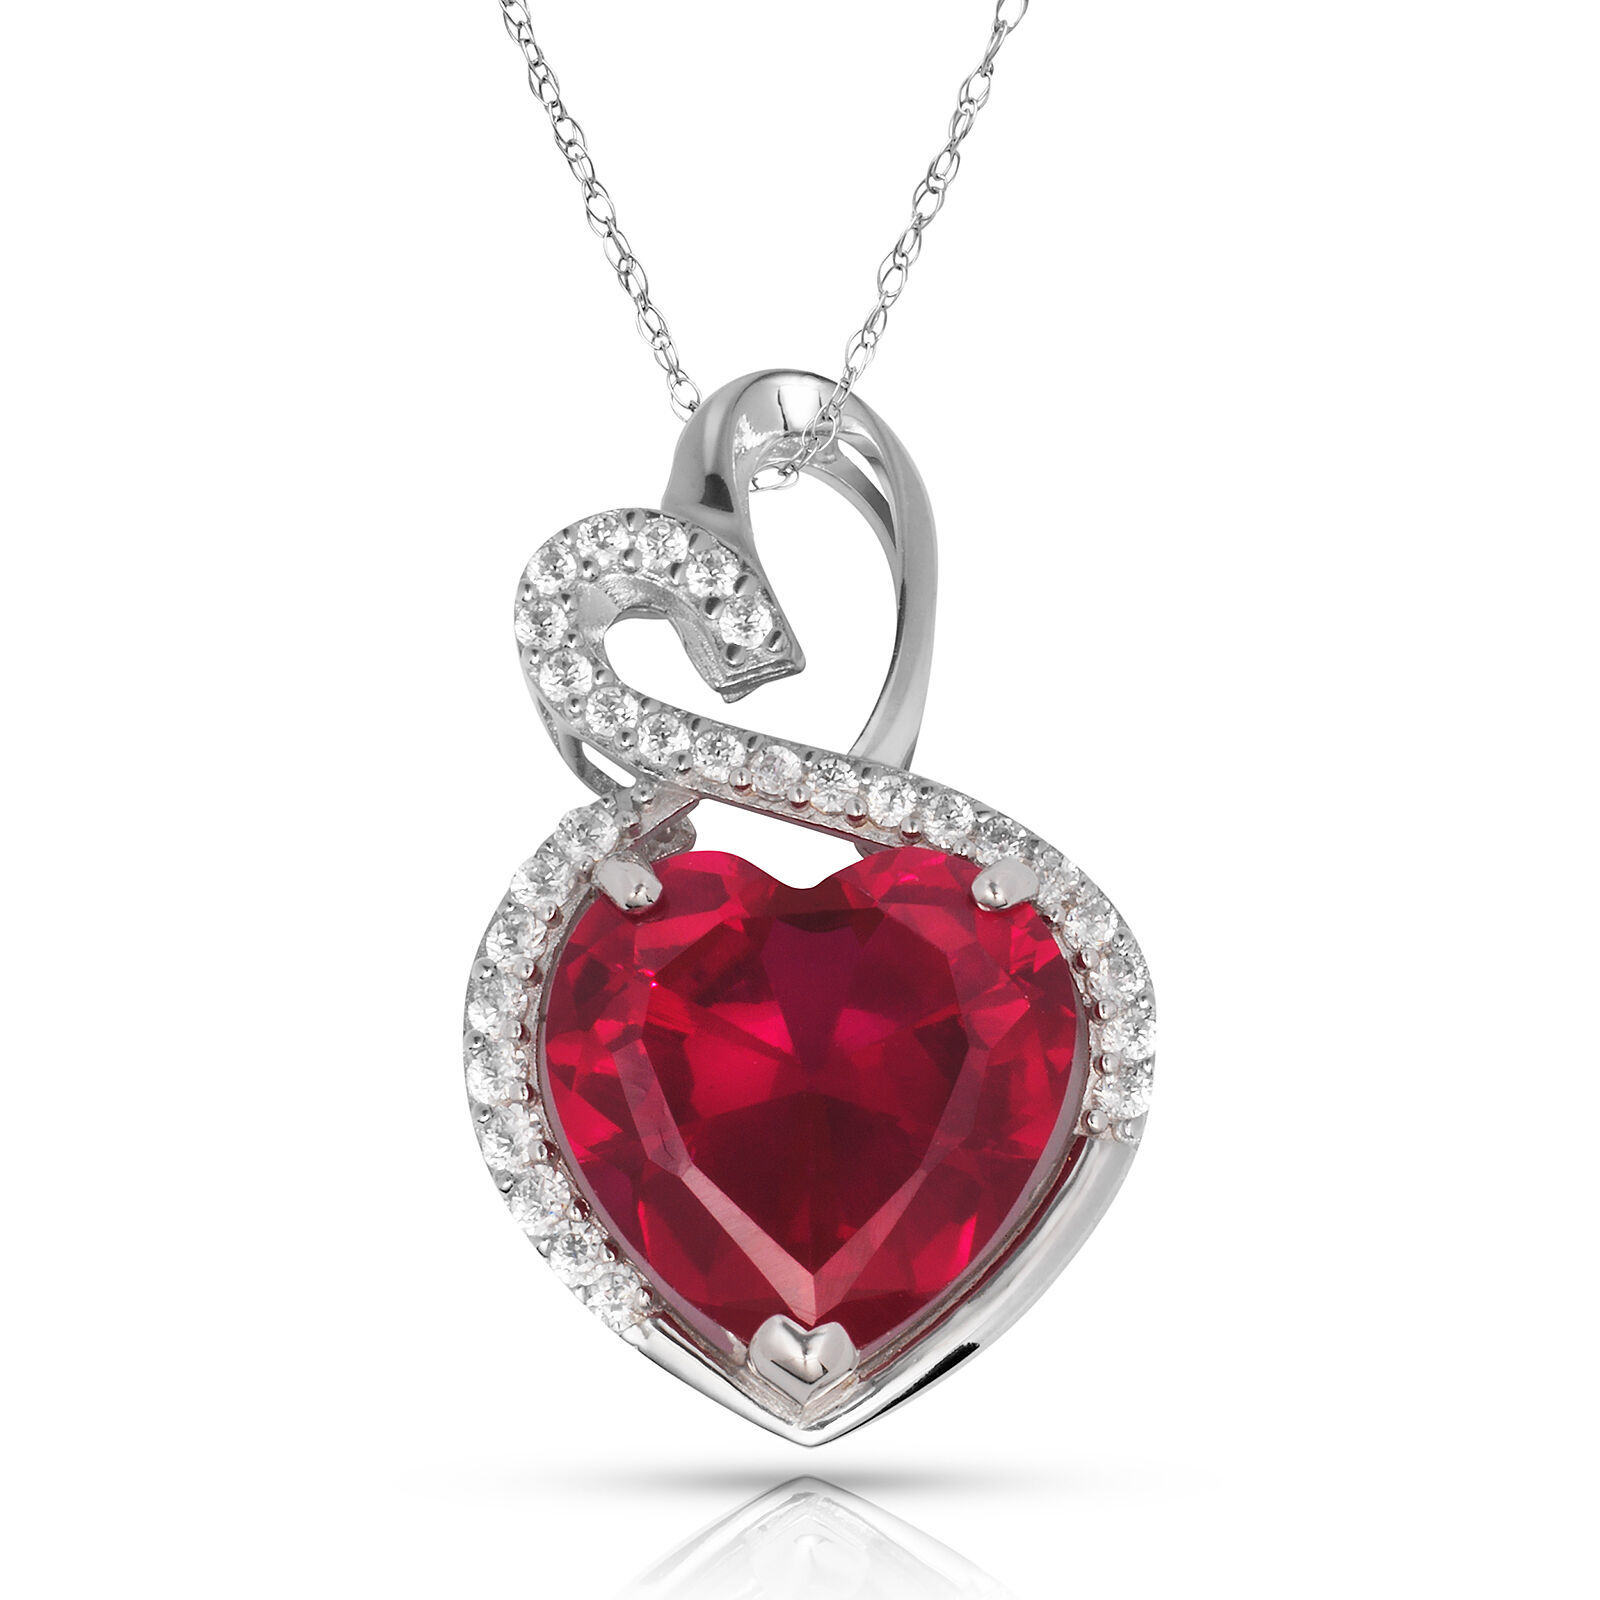 4.20 Carat Halo Red Ruby Double Heart Gemstone Pendant & Necklace14K White Gold - $173.25